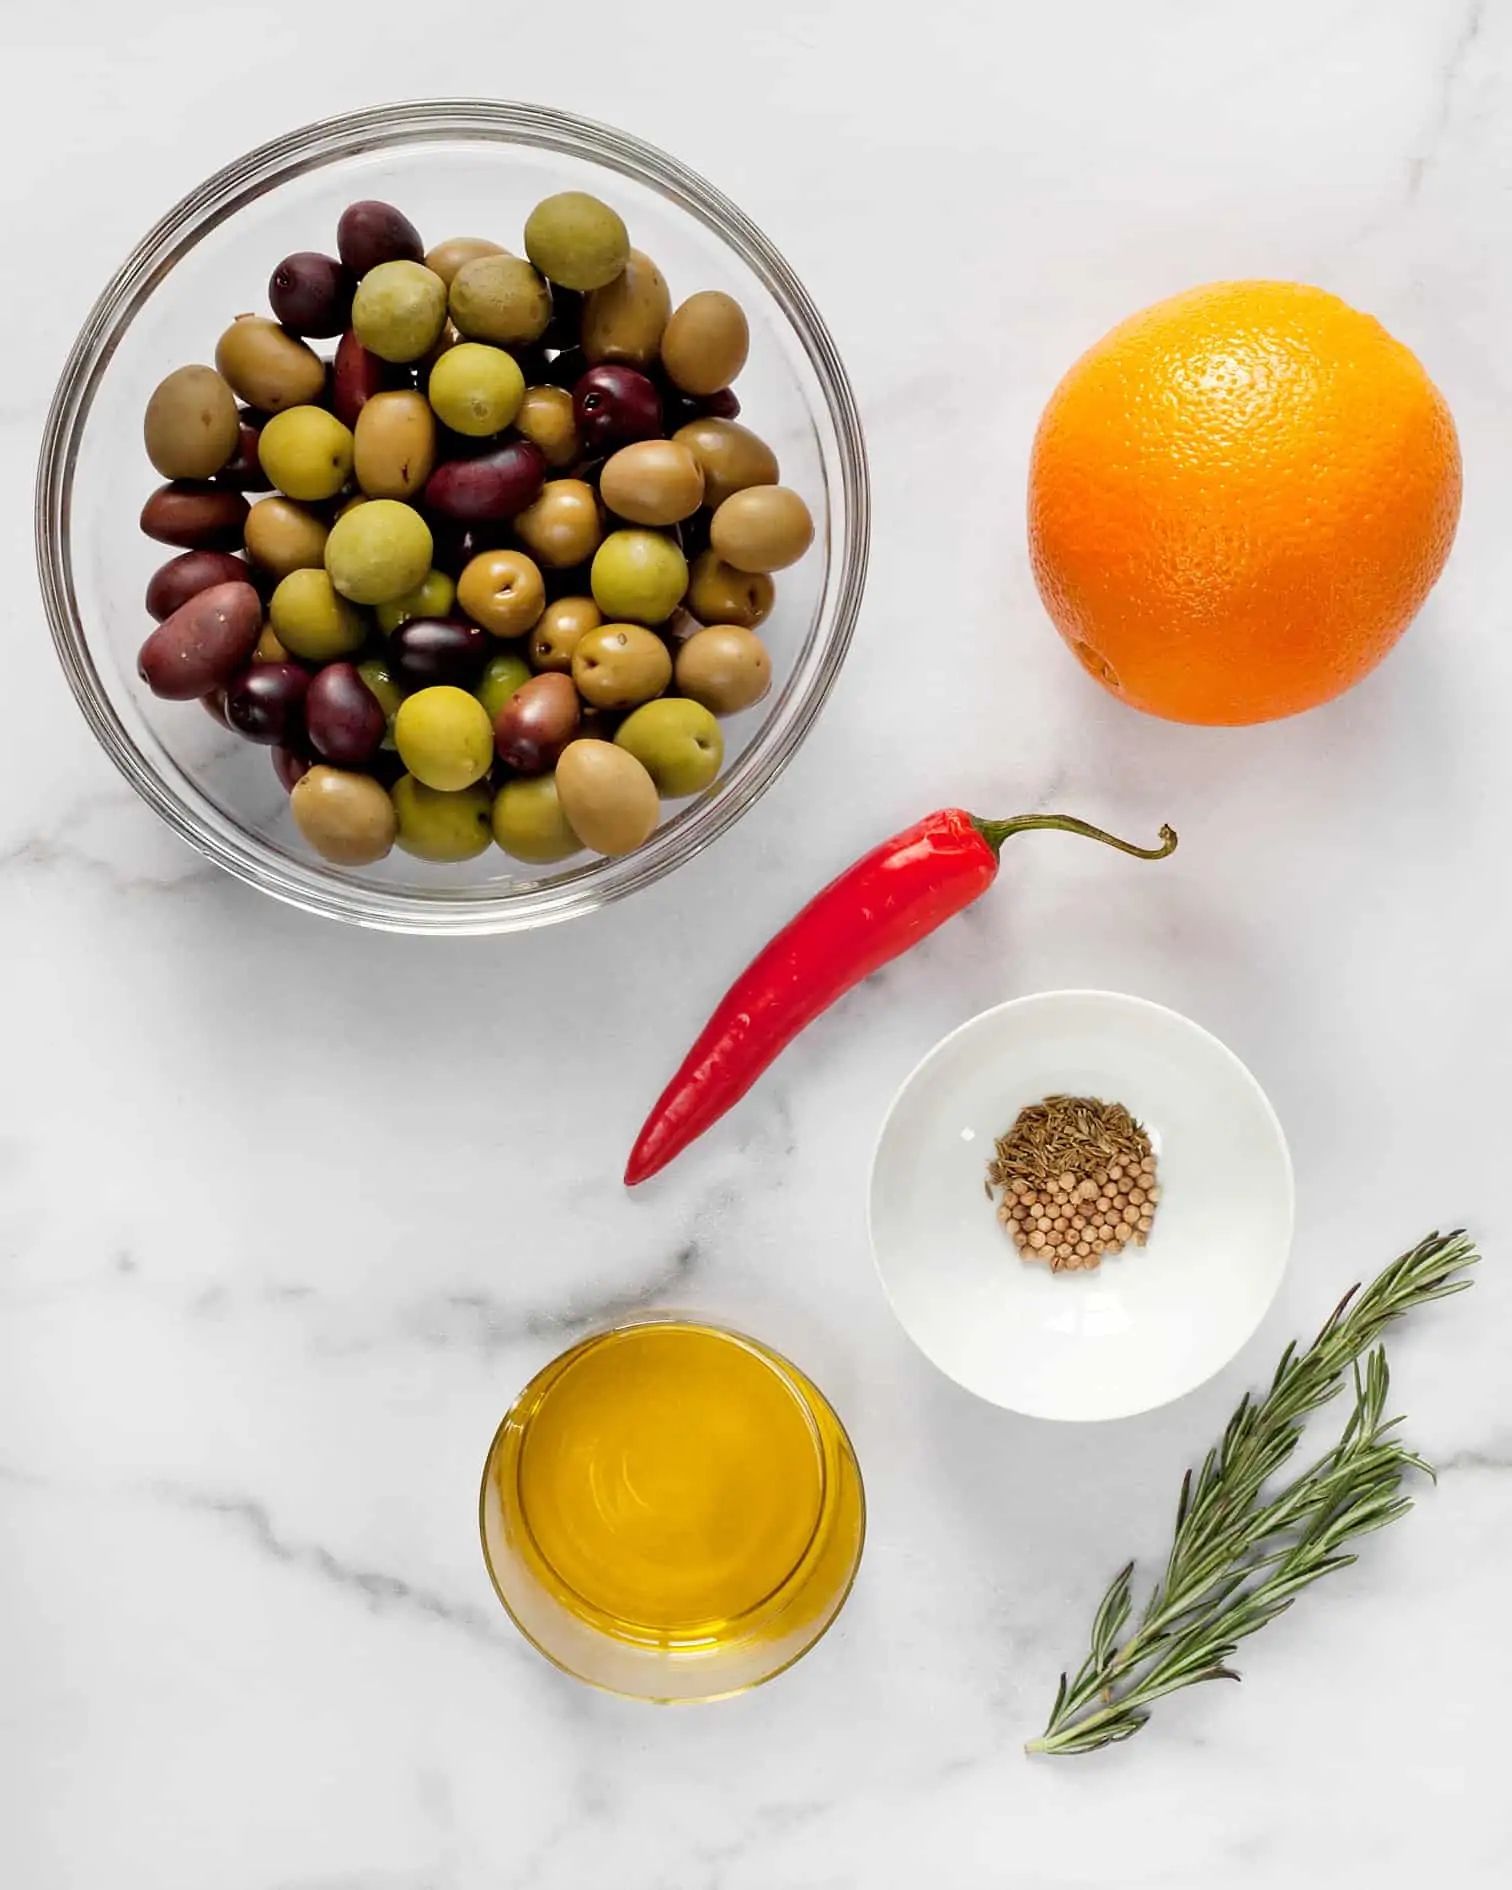 Ingredients including olives, orange, red chili, spices, rosemary and olive oil